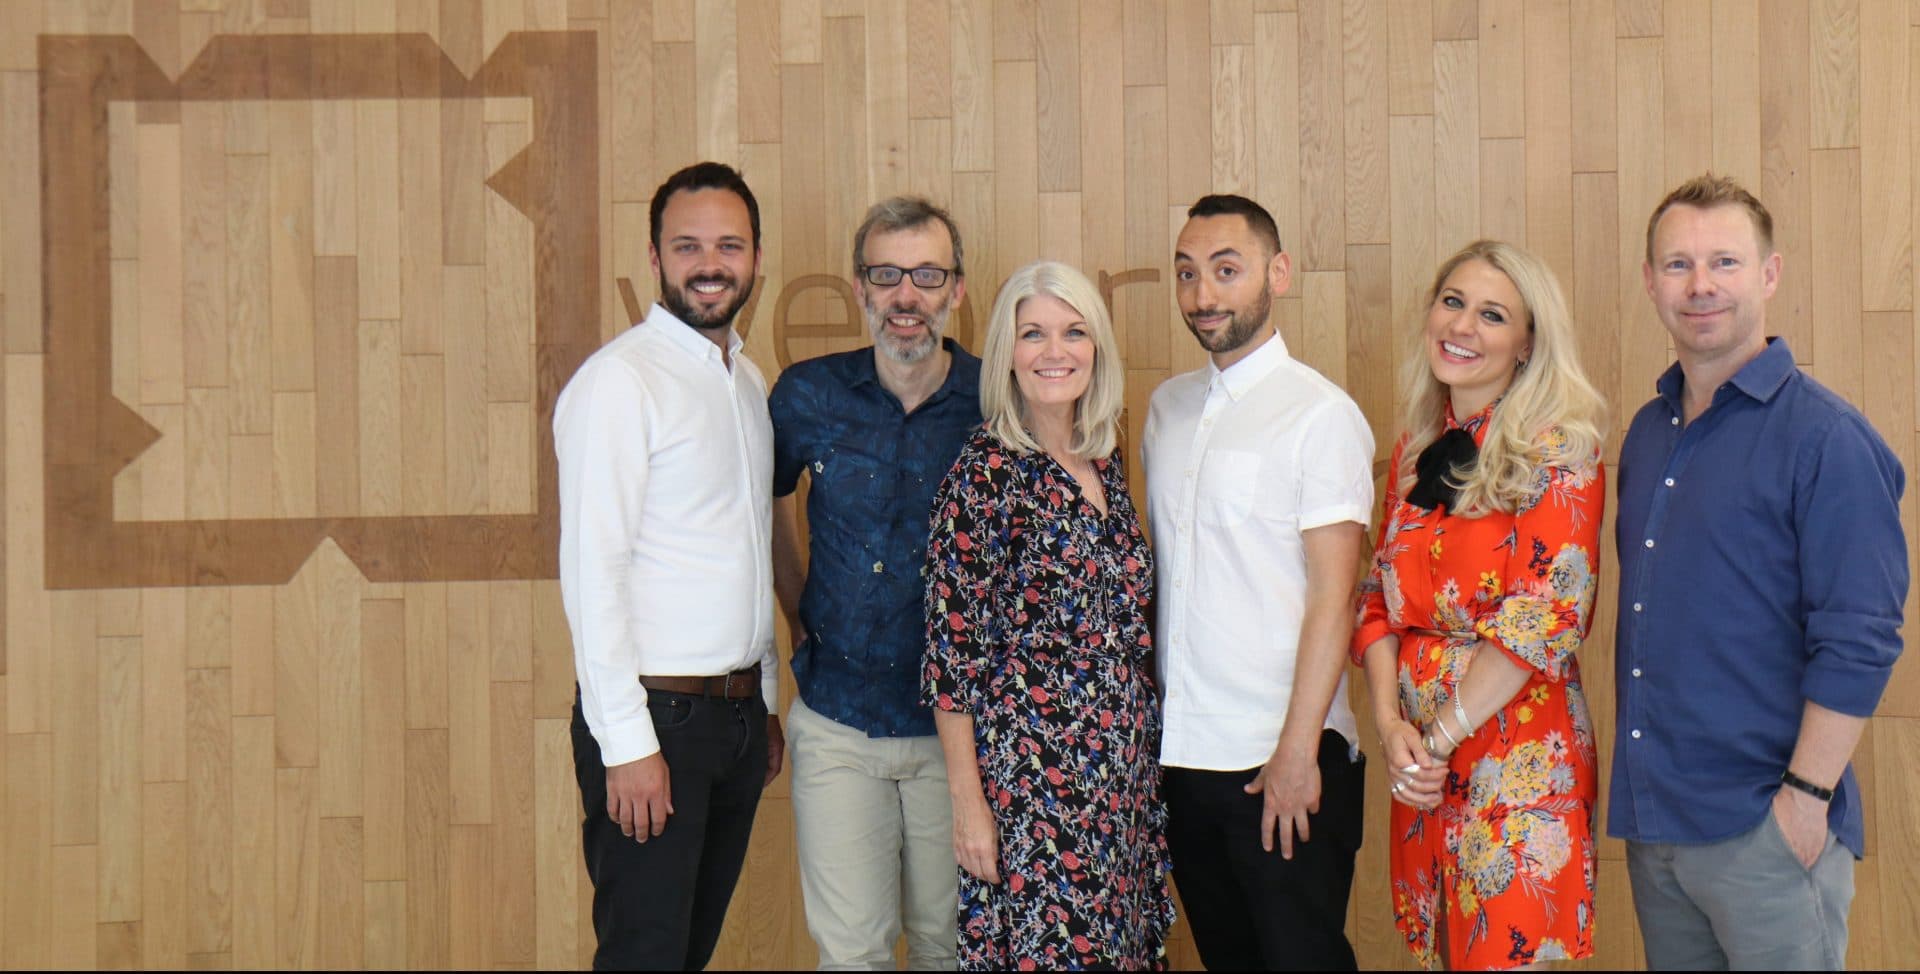 Weber Shandwick Acquires Social Creative Agency That Lot, Taking Multi-platform Storytelling to the Next Level